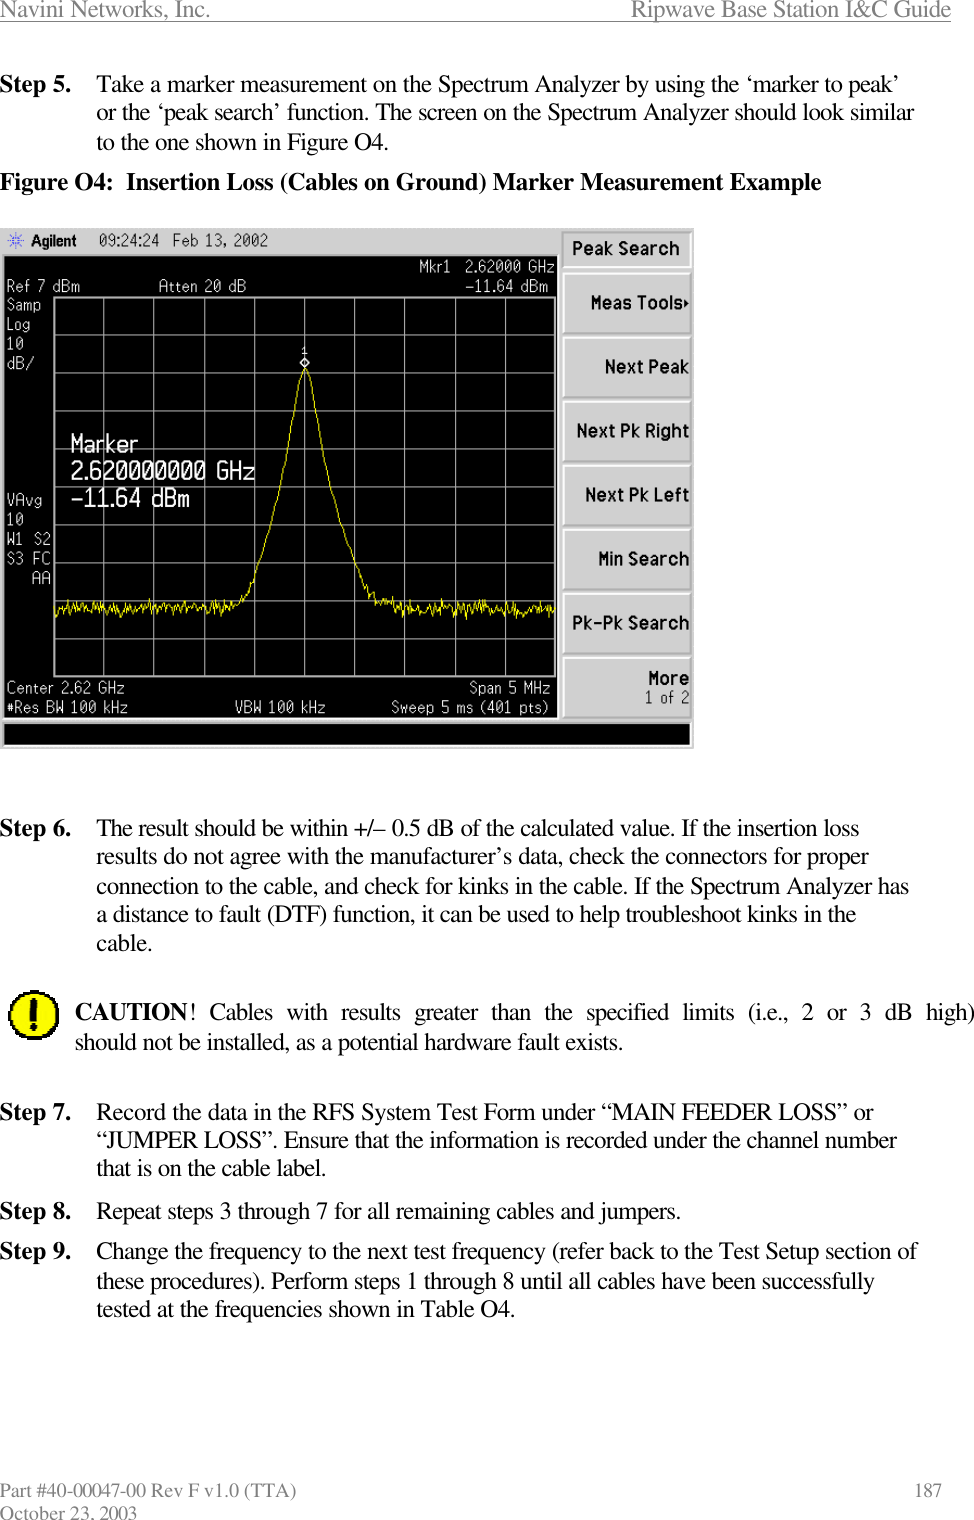 Navini Networks, Inc.                      Ripwave Base Station I&amp;C Guide Part #40-00047-00 Rev F v1.0 (TTA)            187 October 23, 2003 Step 5. Take a marker measurement on the Spectrum Analyzer by using the ‘marker to peak’ or the ‘peak search’ function. The screen on the Spectrum Analyzer should look similar to the one shown in Figure O4. Figure O4:  Insertion Loss (Cables on Ground) Marker Measurement Example                      Step 6. The result should be within +/– 0.5 dB of the calculated value. If the insertion loss results do not agree with the manufacturer’s data, check the connectors for proper connection to the cable, and check for kinks in the cable. If the Spectrum Analyzer has a distance to fault (DTF) function, it can be used to help troubleshoot kinks in the cable.  CAUTION! Cables with results greater than the specified limits (i.e., 2 or 3 dB high) should not be installed, as a potential hardware fault exists.  Step 7. Record the data in the RFS System Test Form under “MAIN FEEDER LOSS” or “JUMPER LOSS”. Ensure that the information is recorded under the channel number that is on the cable label. Step 8. Repeat steps 3 through 7 for all remaining cables and jumpers.  Step 9. Change the frequency to the next test frequency (refer back to the Test Setup section of these procedures). Perform steps 1 through 8 until all cables have been successfully tested at the frequencies shown in Table O4.  